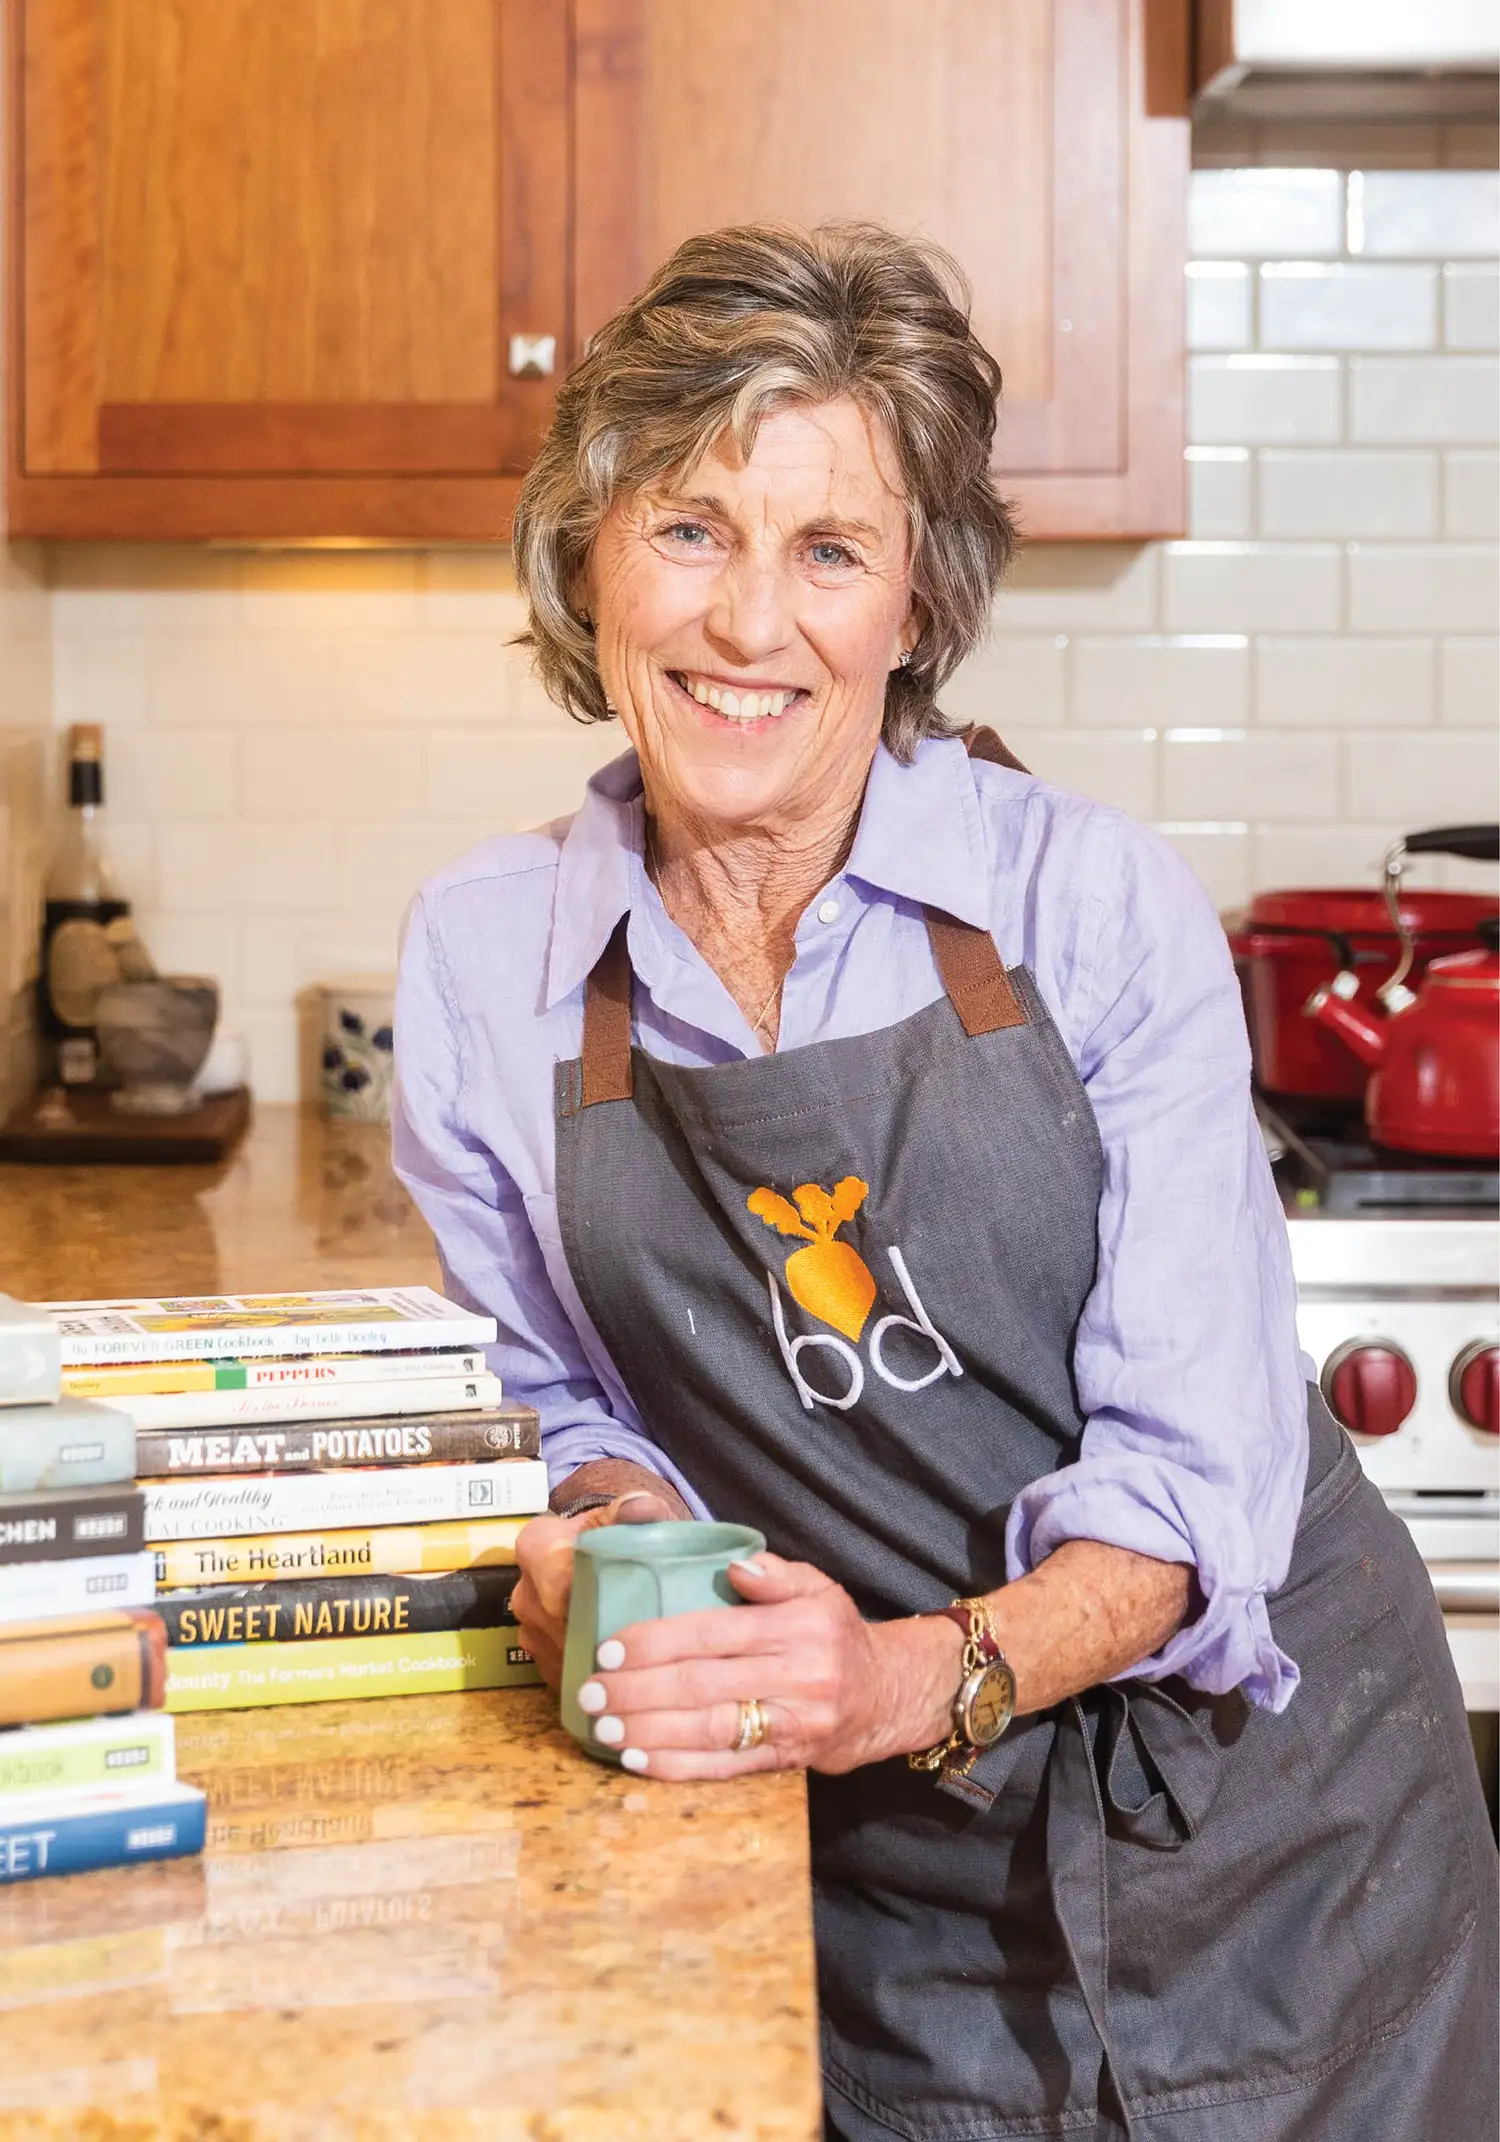 Beth Dooley posing in kitchen with mug, books on counter and wearing apron